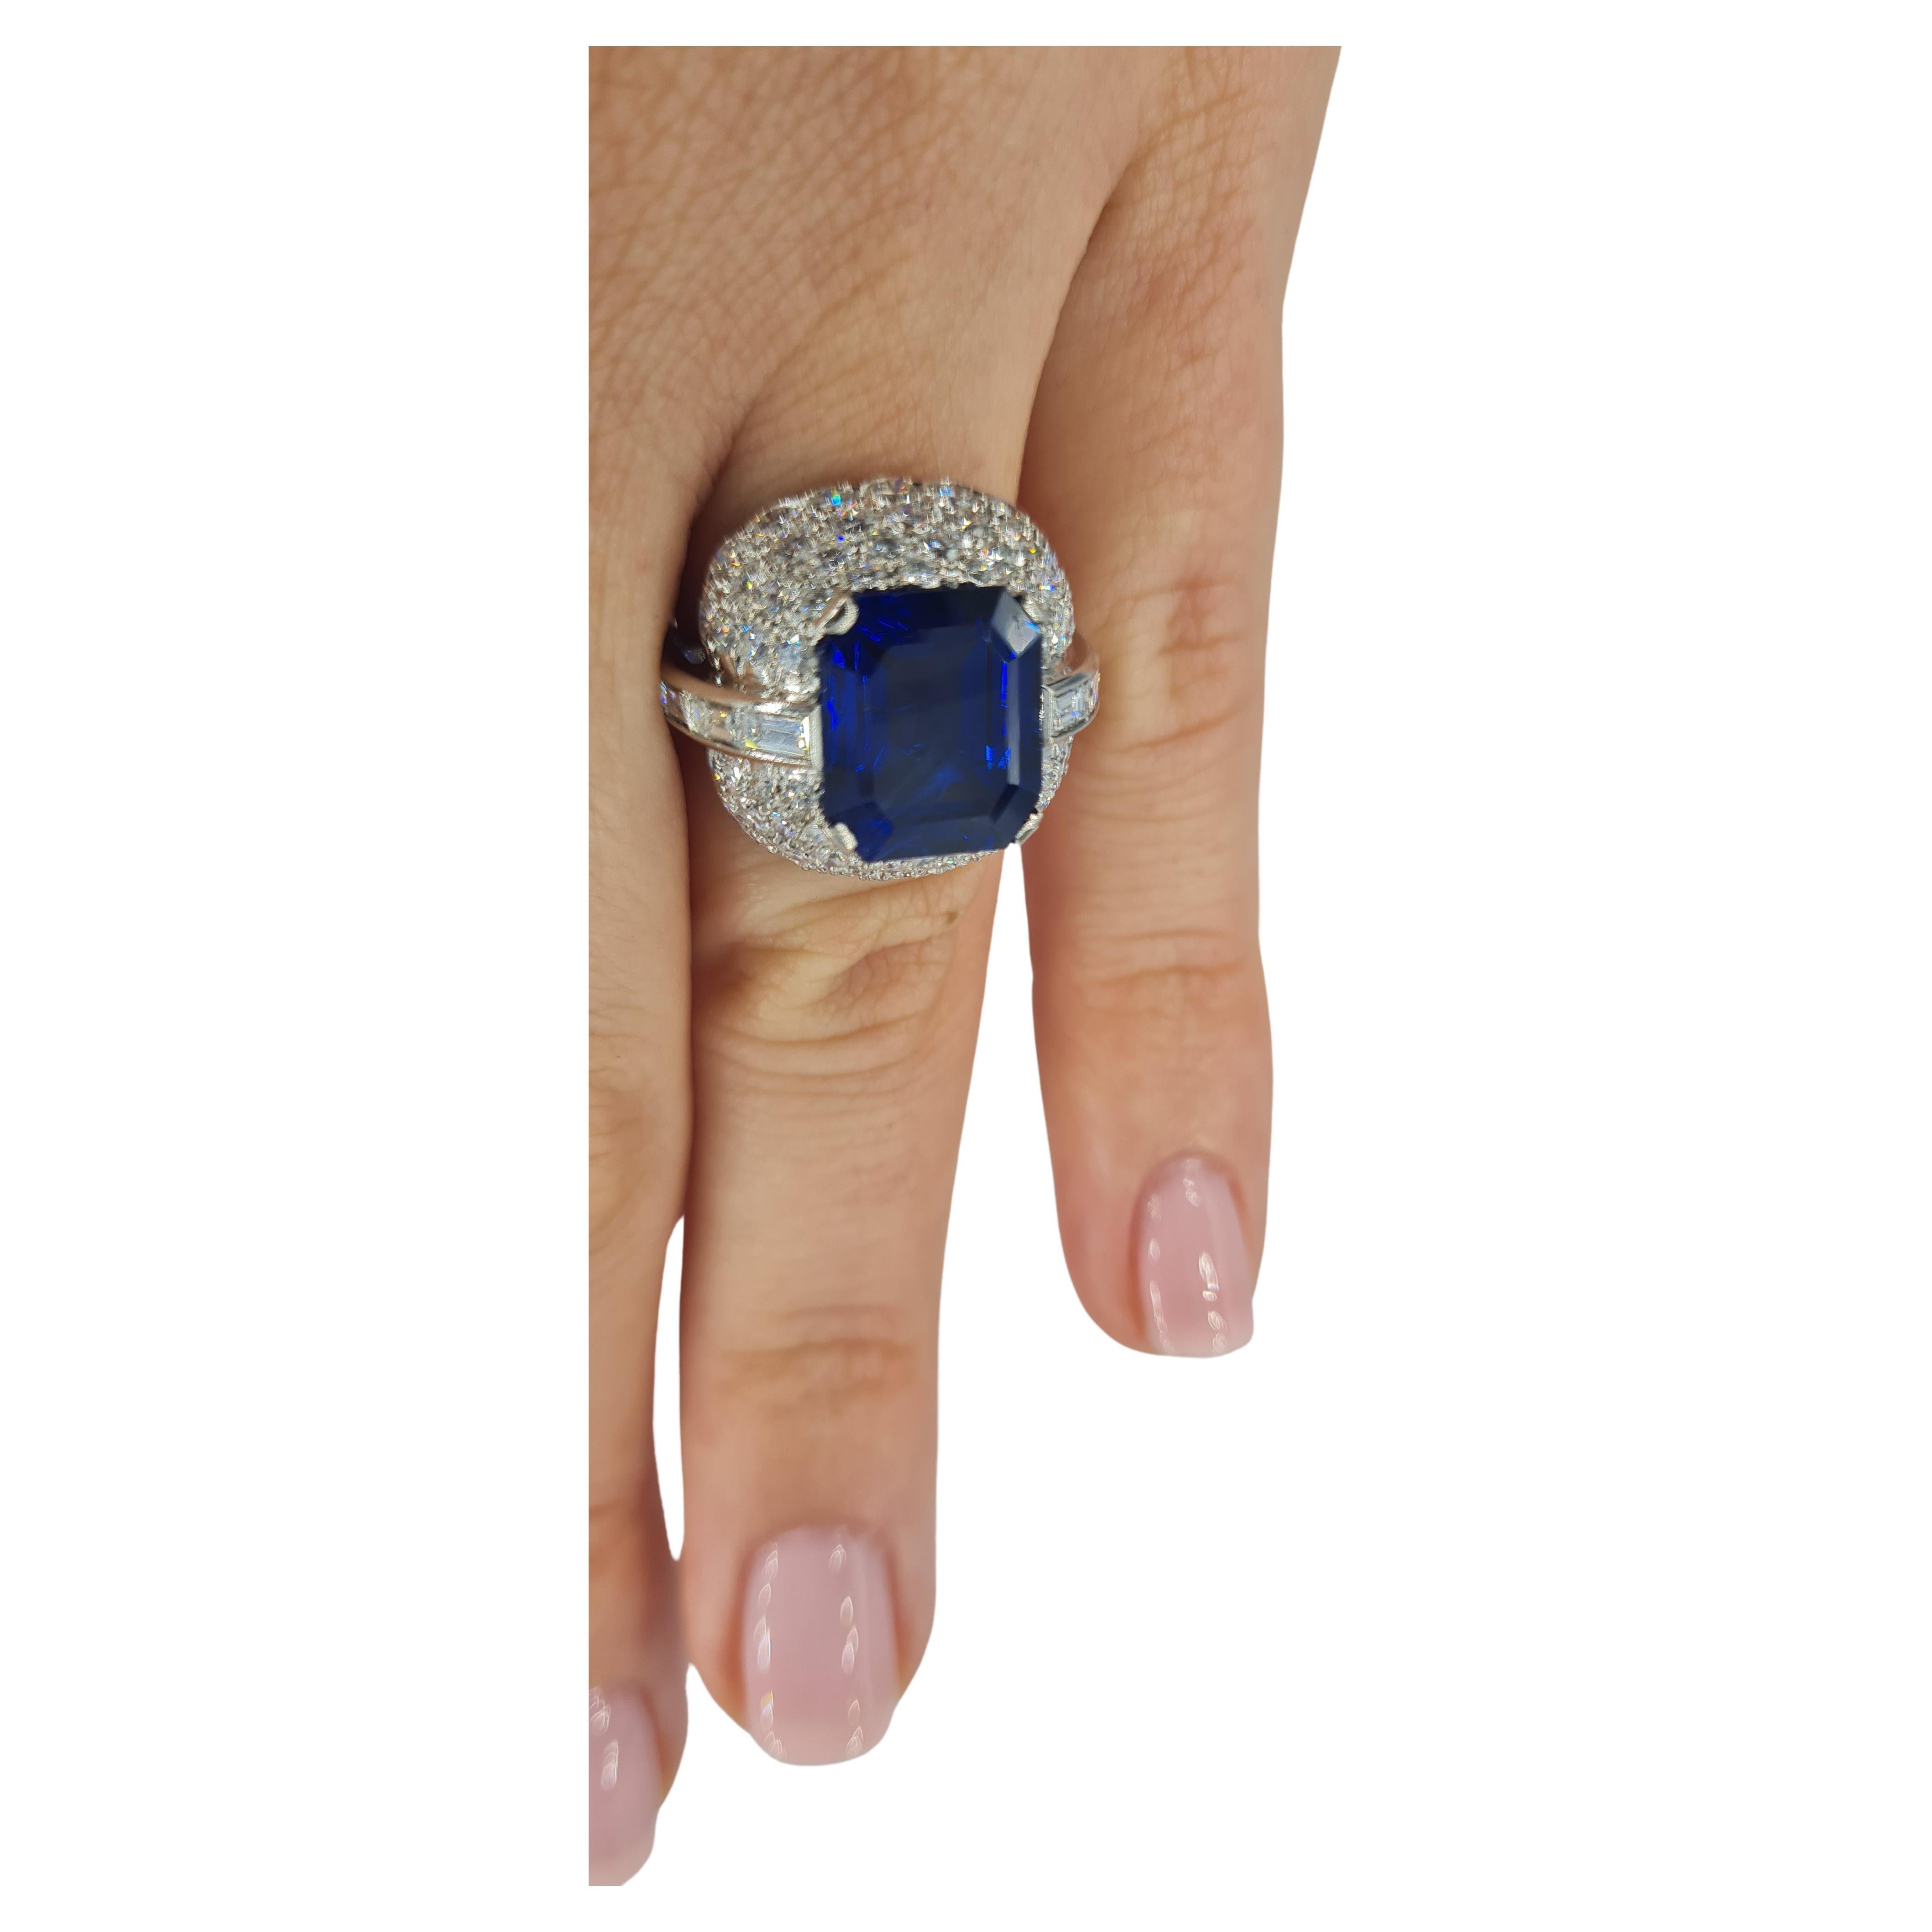 Gemstone enthusiasts, prepare to be dazzled by the rare and mesmerizing beauty of this Natural Color Changing Sapphire hailing from Madagascar.

At a weight of 5.21 carats and boasting a rectangular octagon shape, this gemstone captivates with its